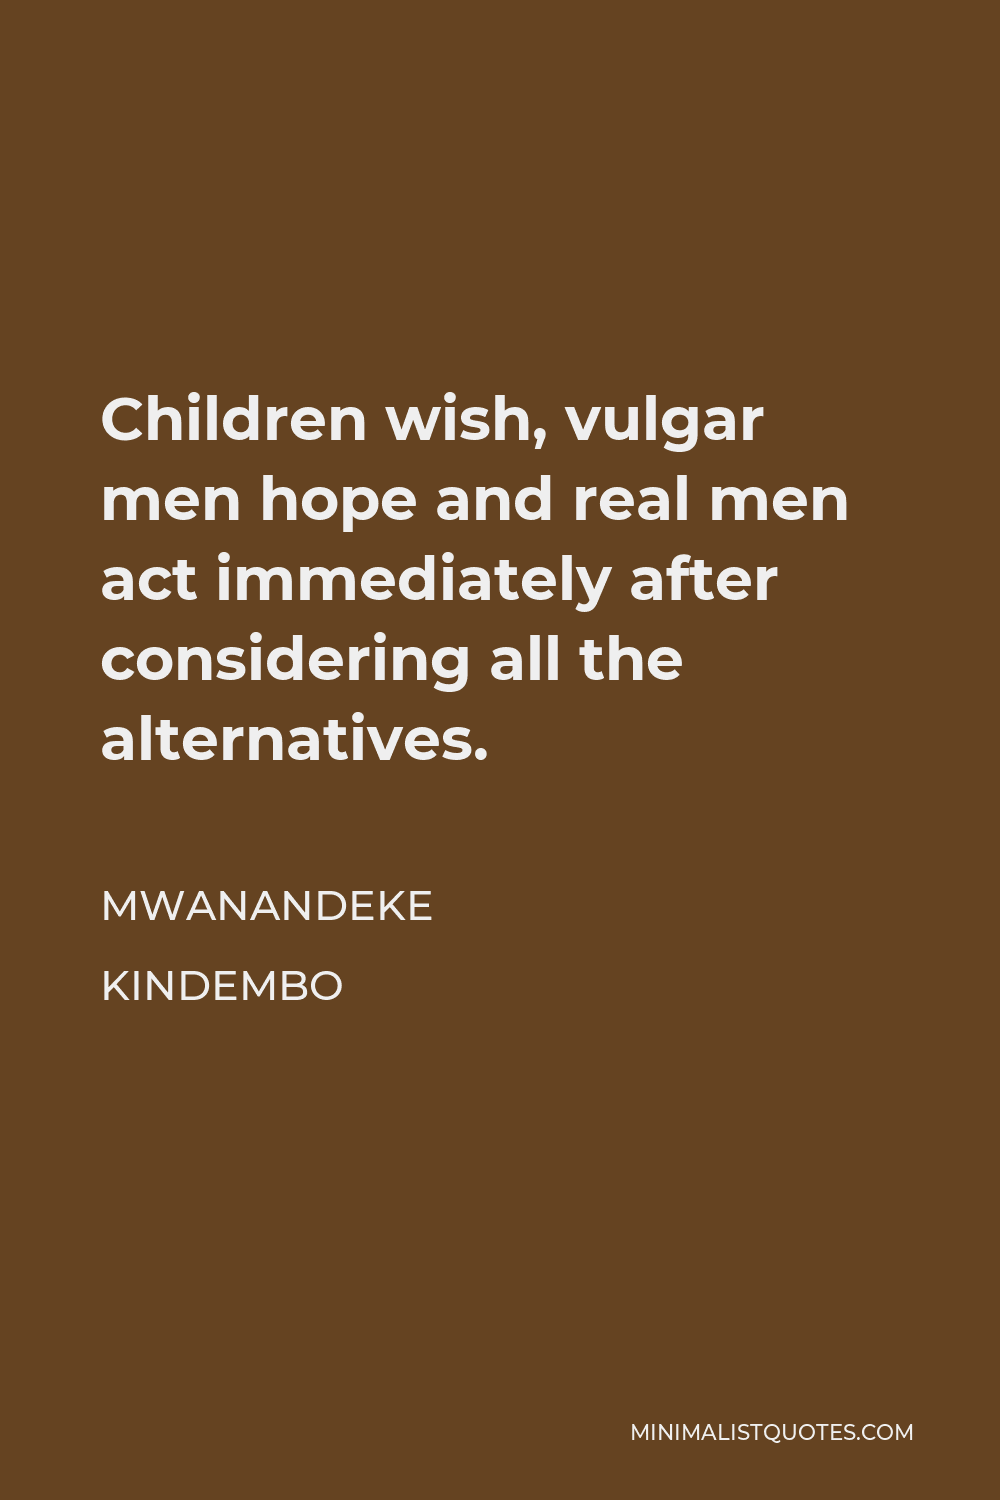 Mwanandeke Kindembo Quote - Children wish, vulgar men hope and real men act immediately after considering all the alternatives.